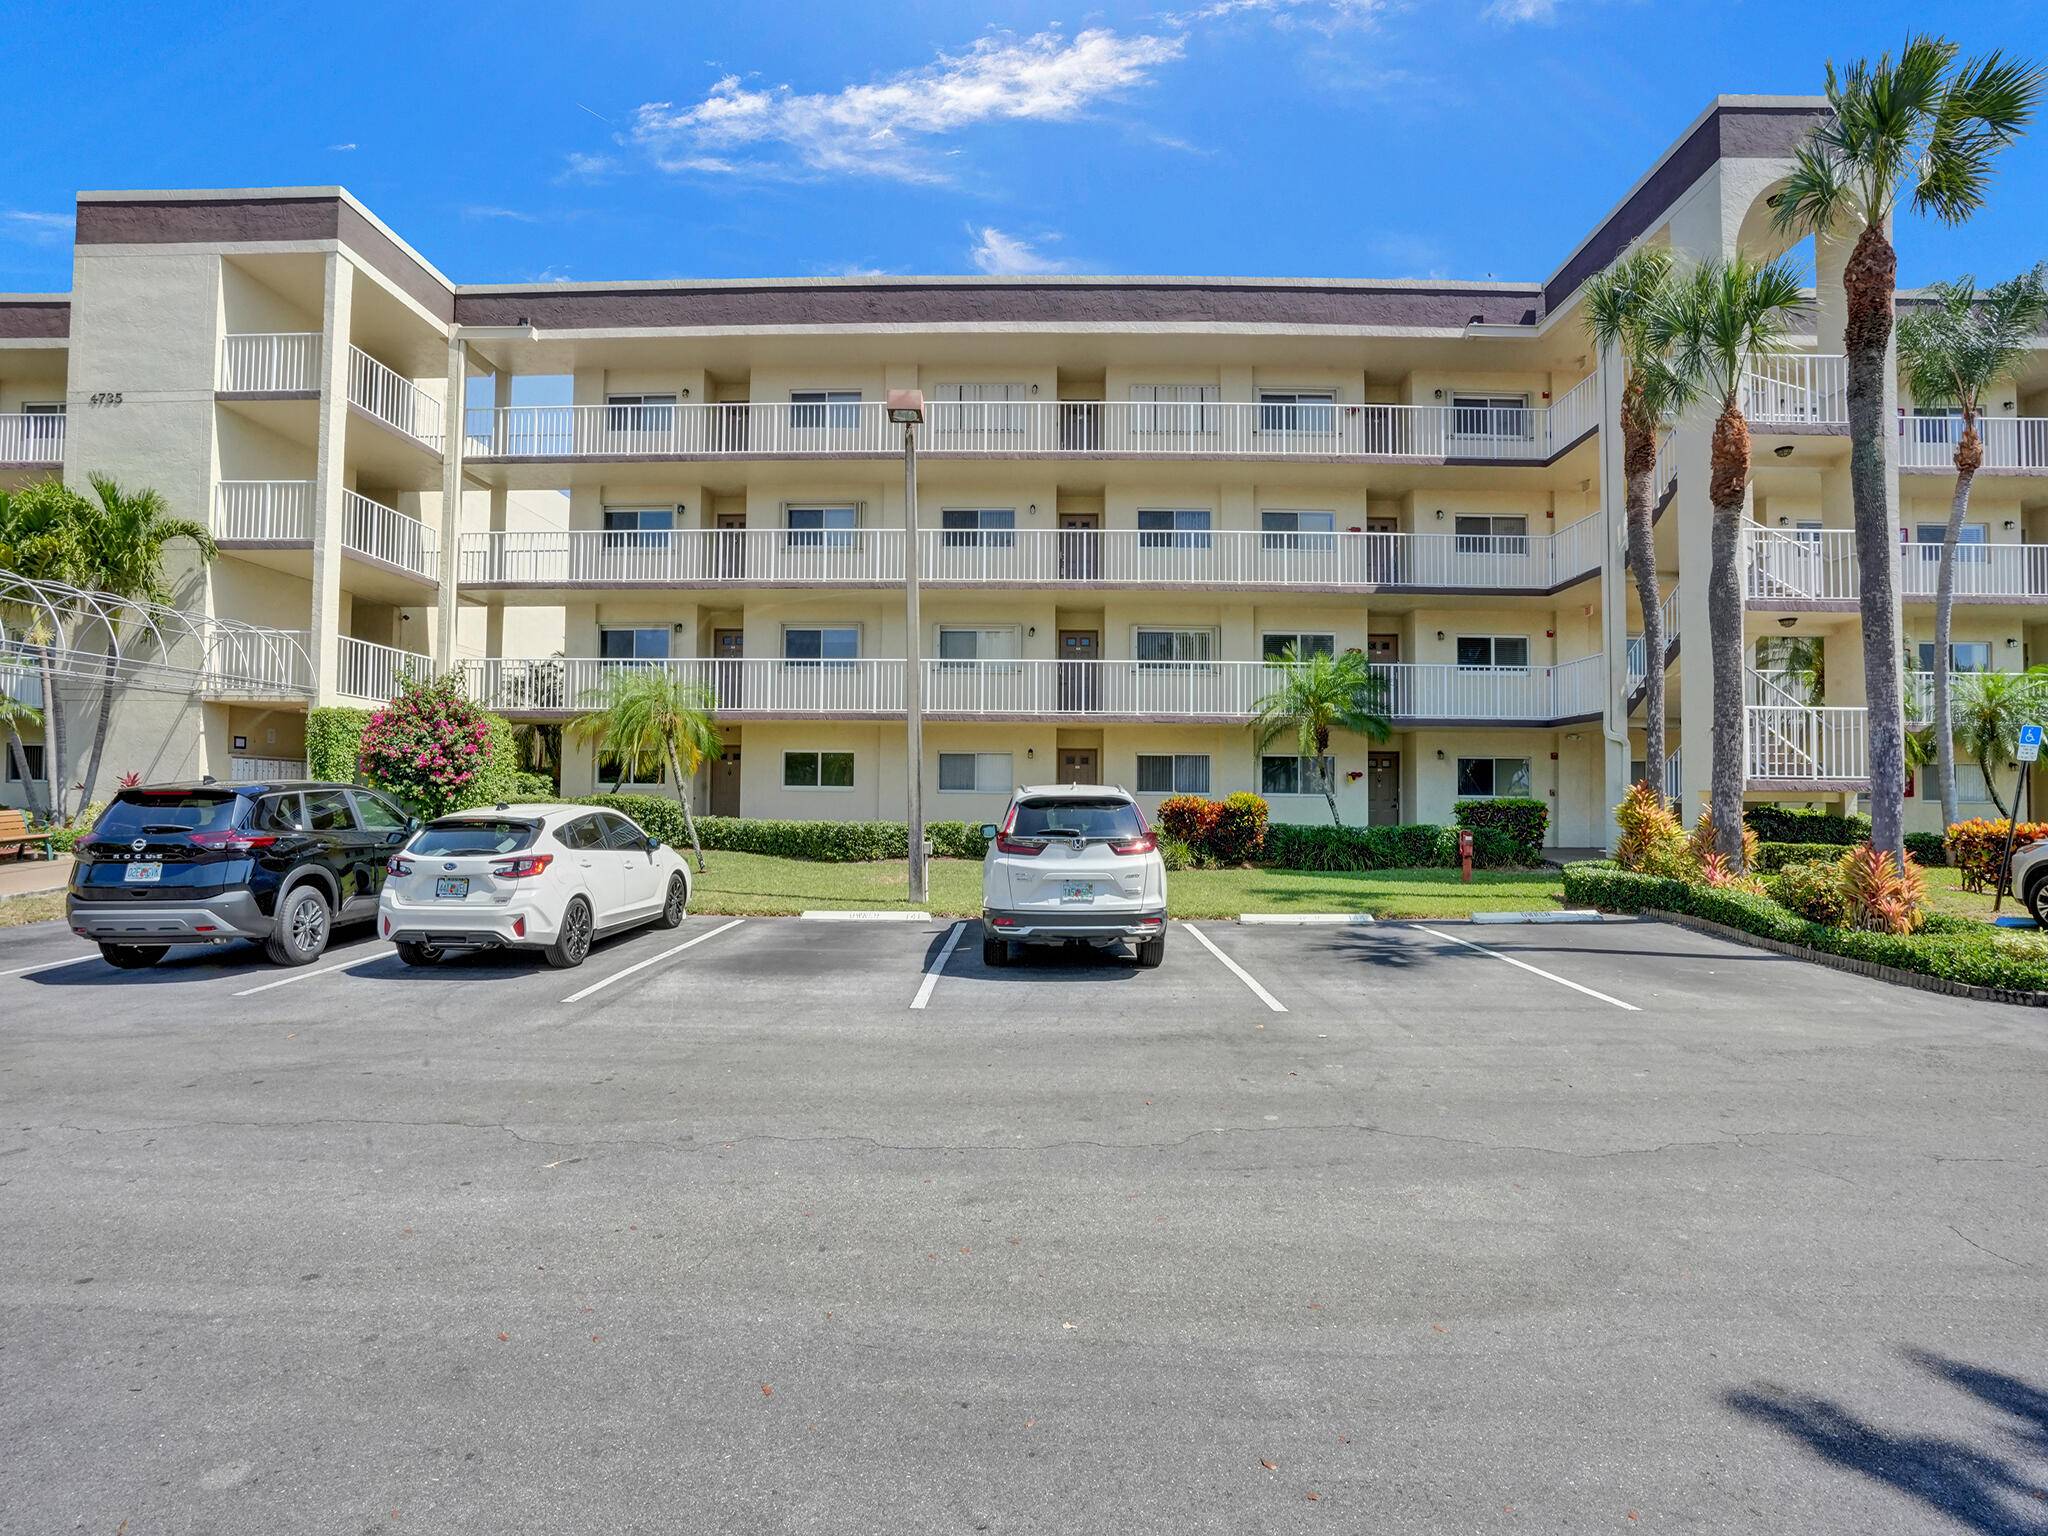 This spacious 2 bedroom 2 bath condo has a full size washer dryer.